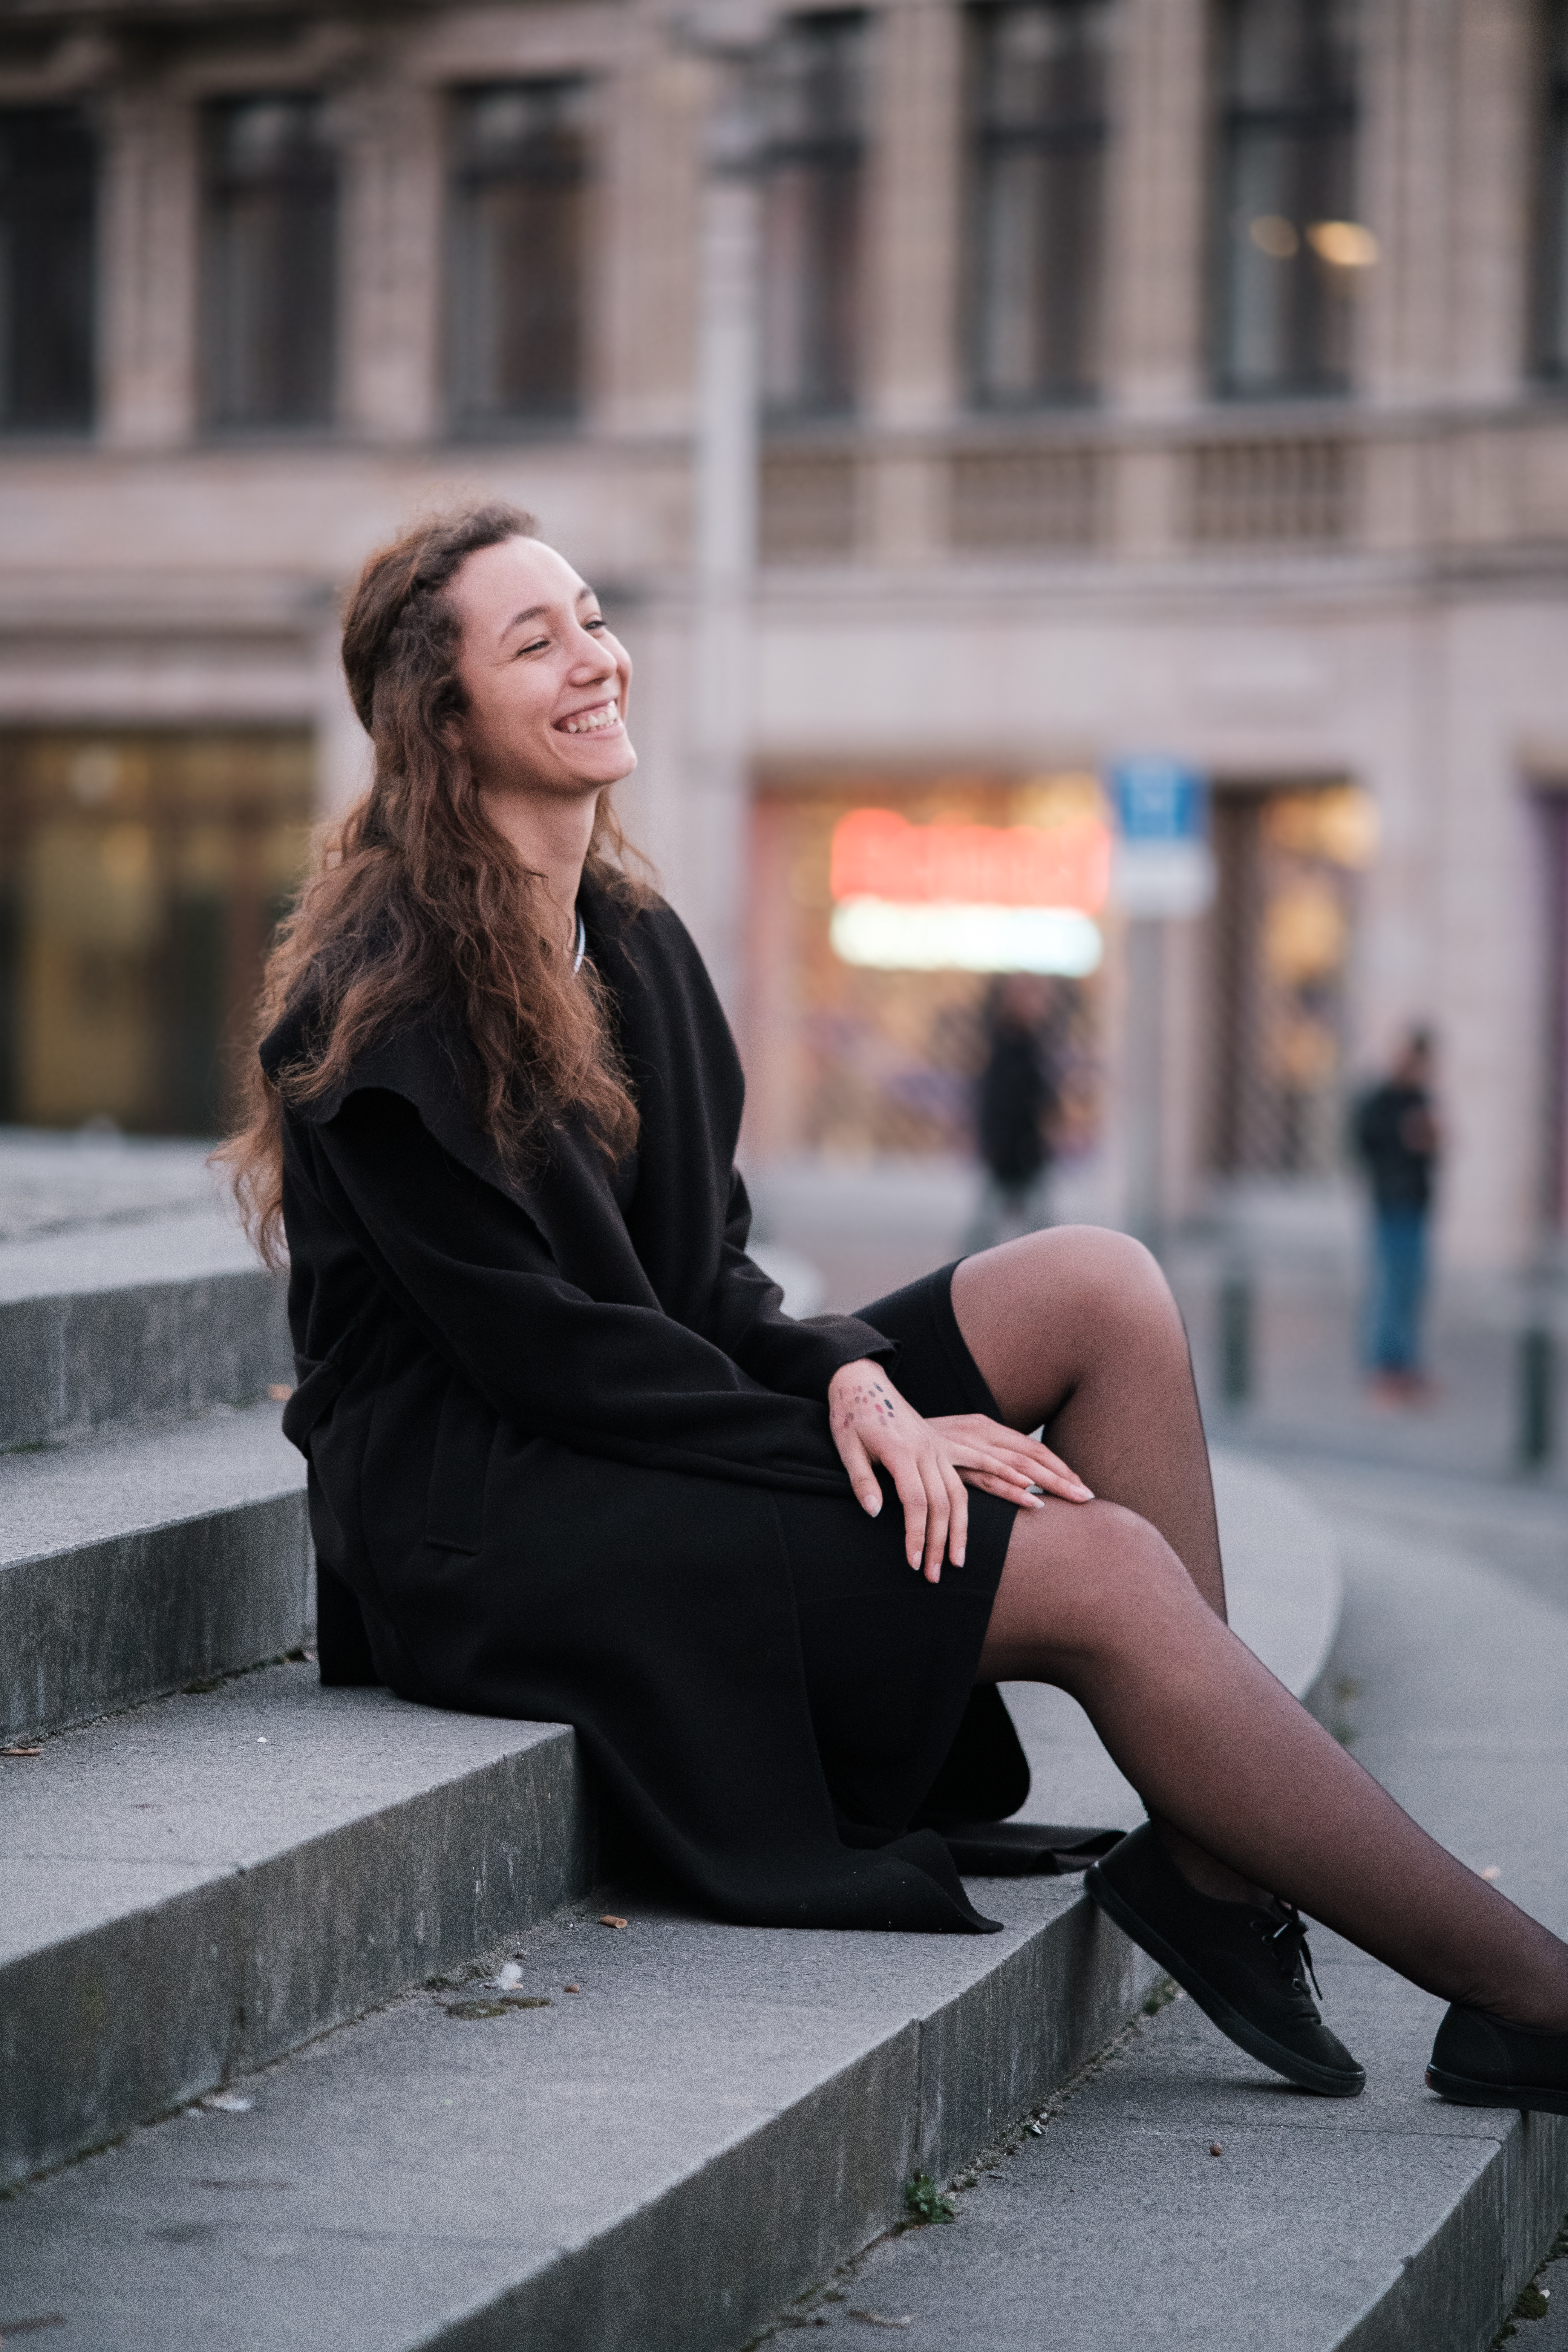 White/latina woman with long brown hair dressed in black, 
													   sitting outside on stairs, smiling 